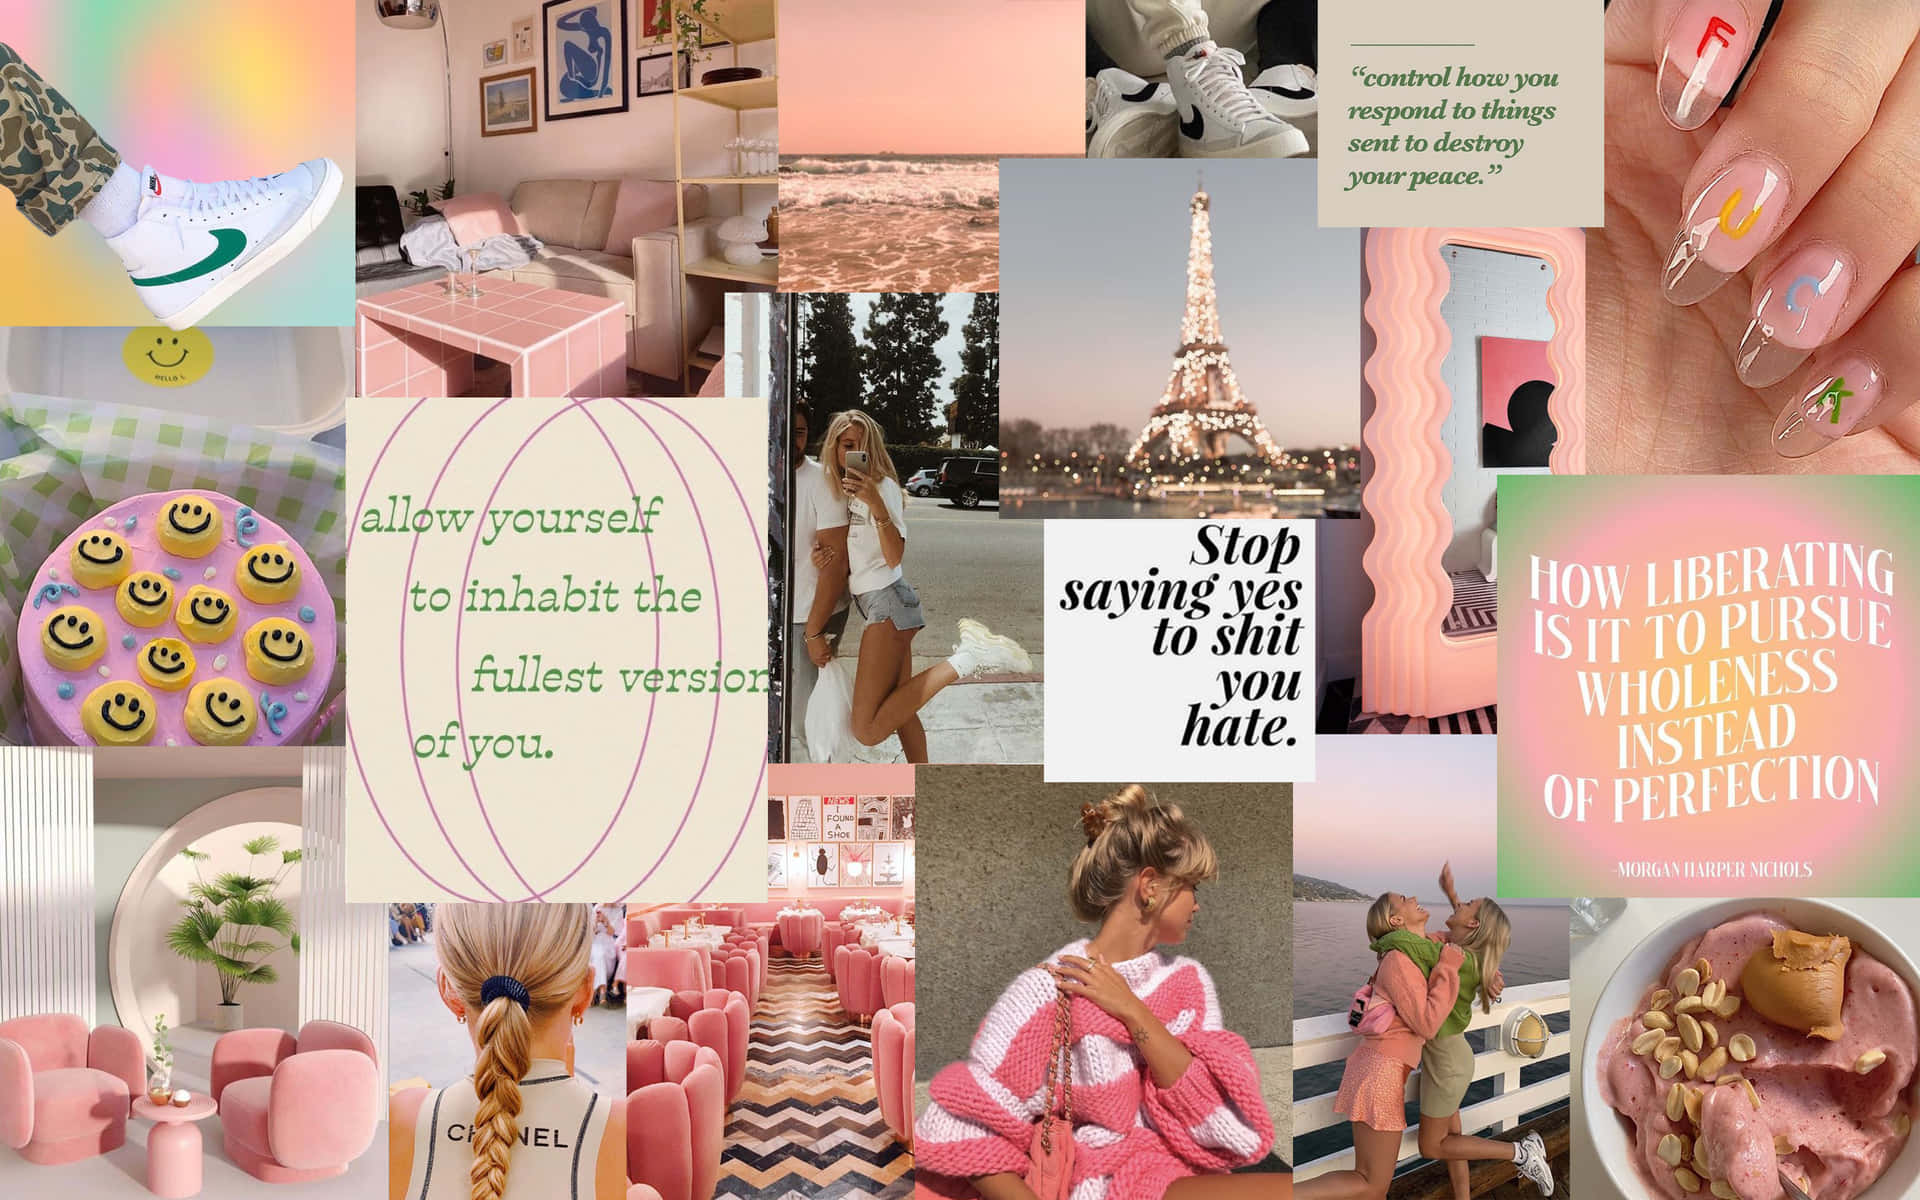 A Collage Of Photos Of Pink And White Items Wallpaper